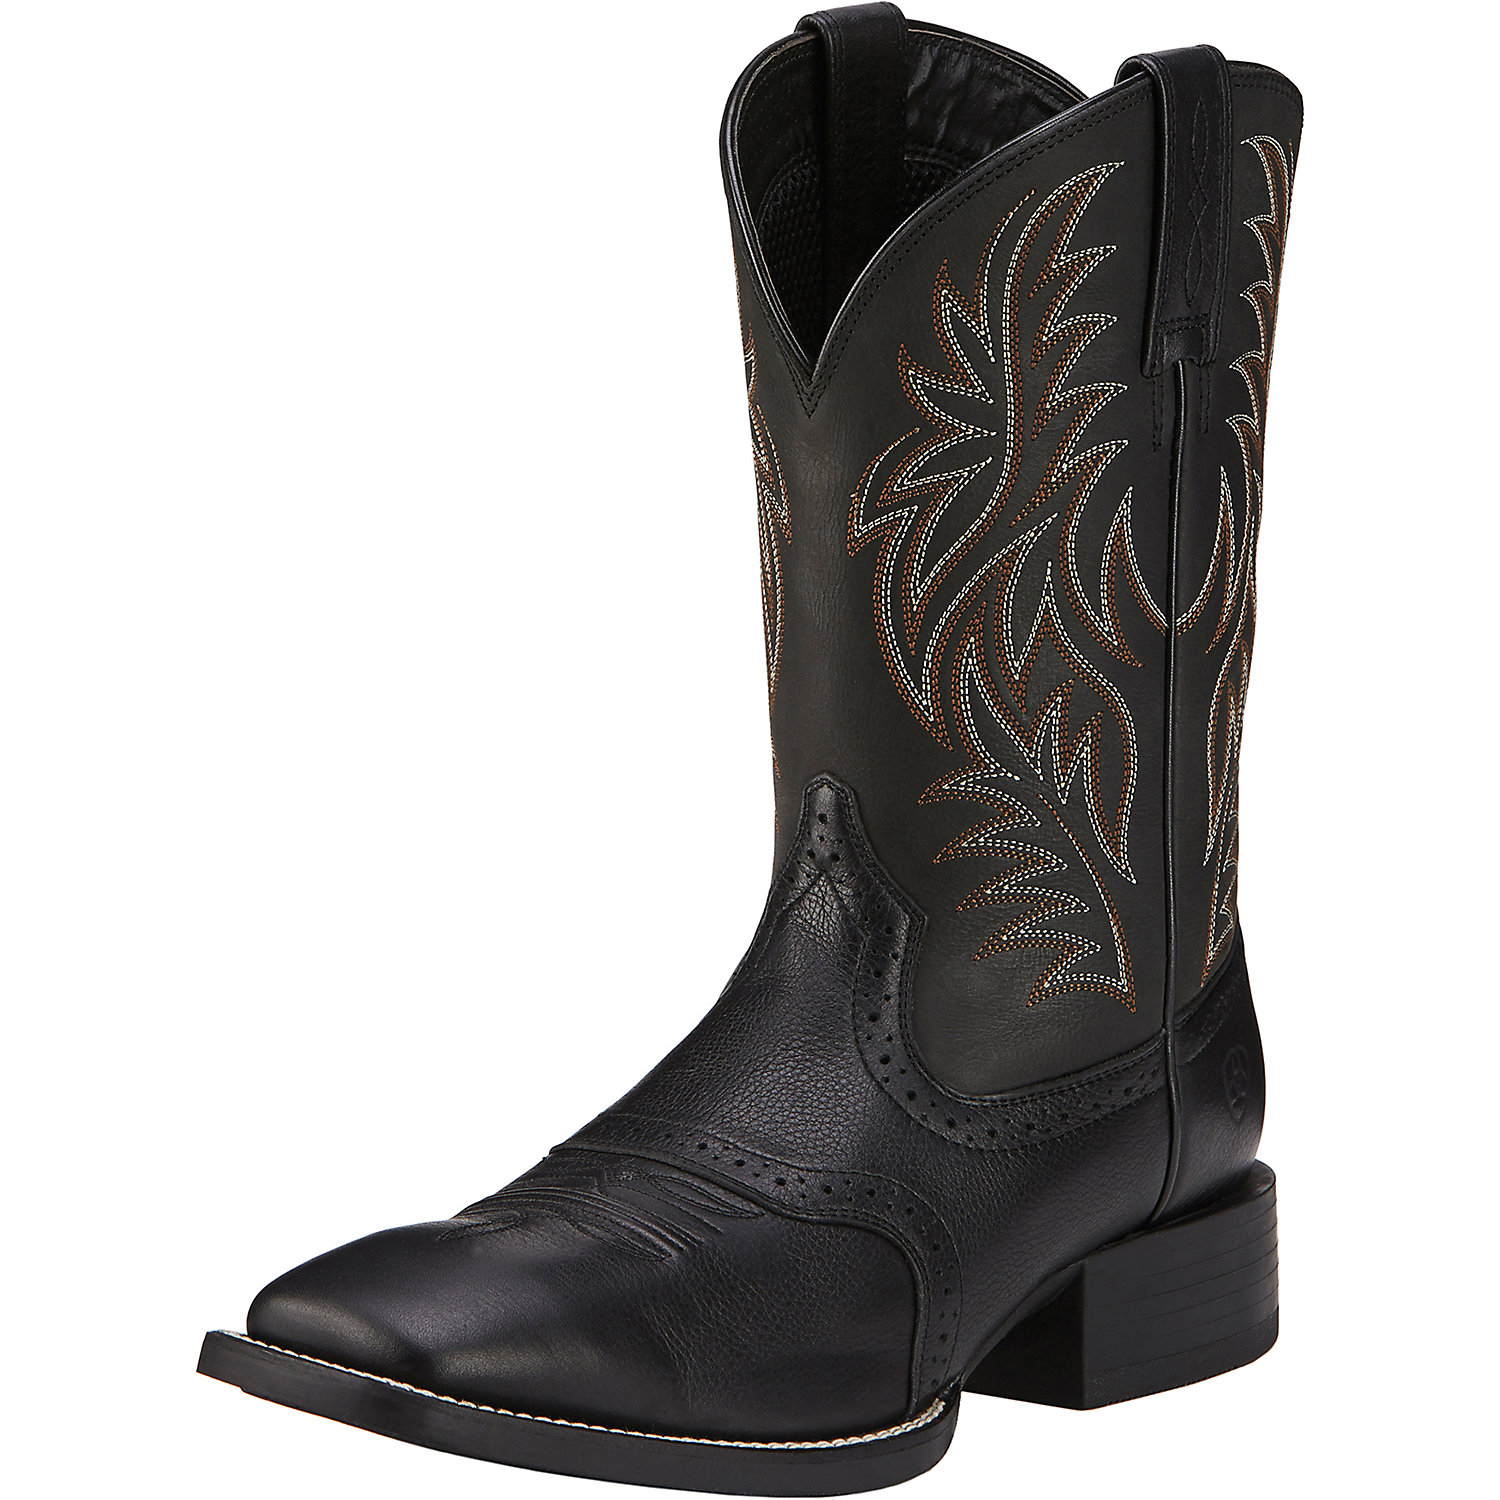 Ariat Mens Sport Western Wide Square Toe Boot